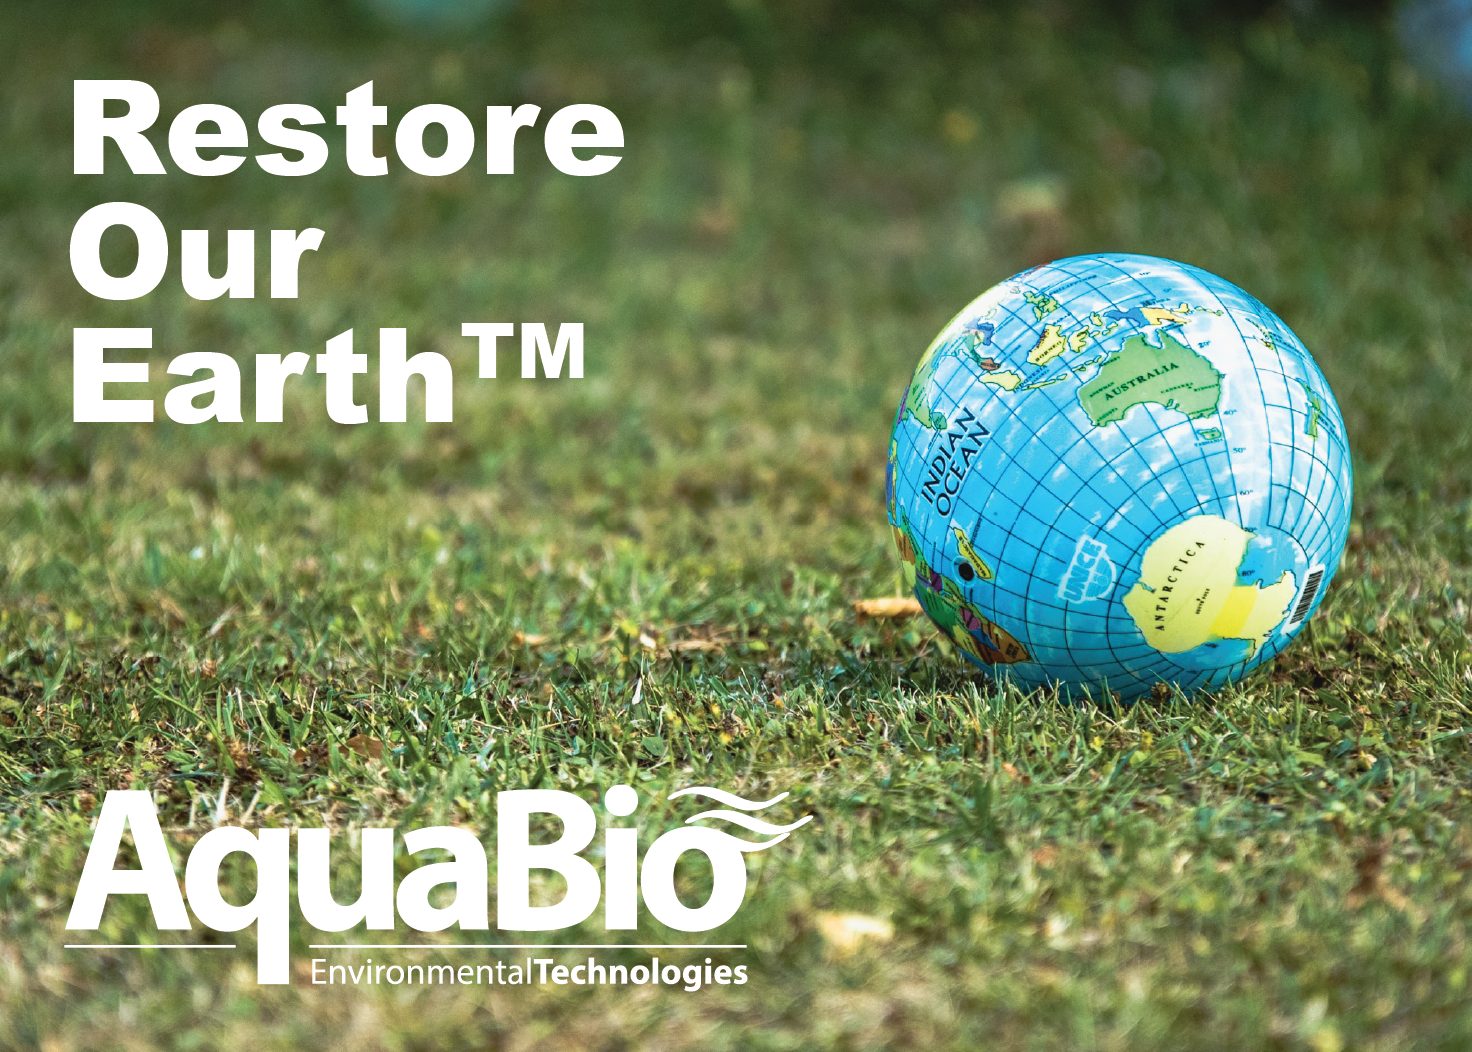 Restore Our Earth graphic showing globe resting on green lawn